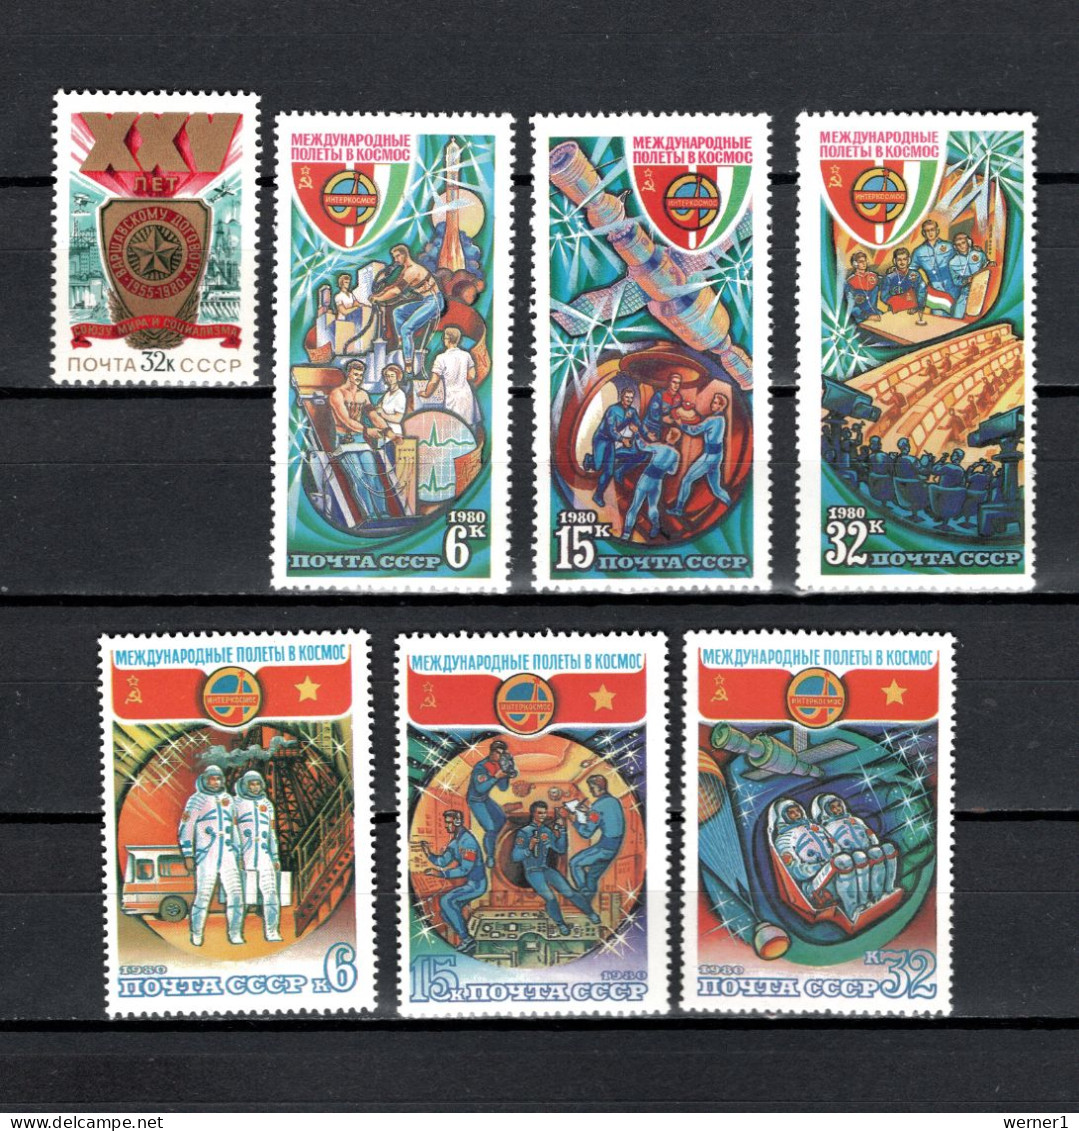 USSR Russia 1980 Space, Warsaw Treaty, Interkosmos 7 Stamps MNH - Rusia & URSS